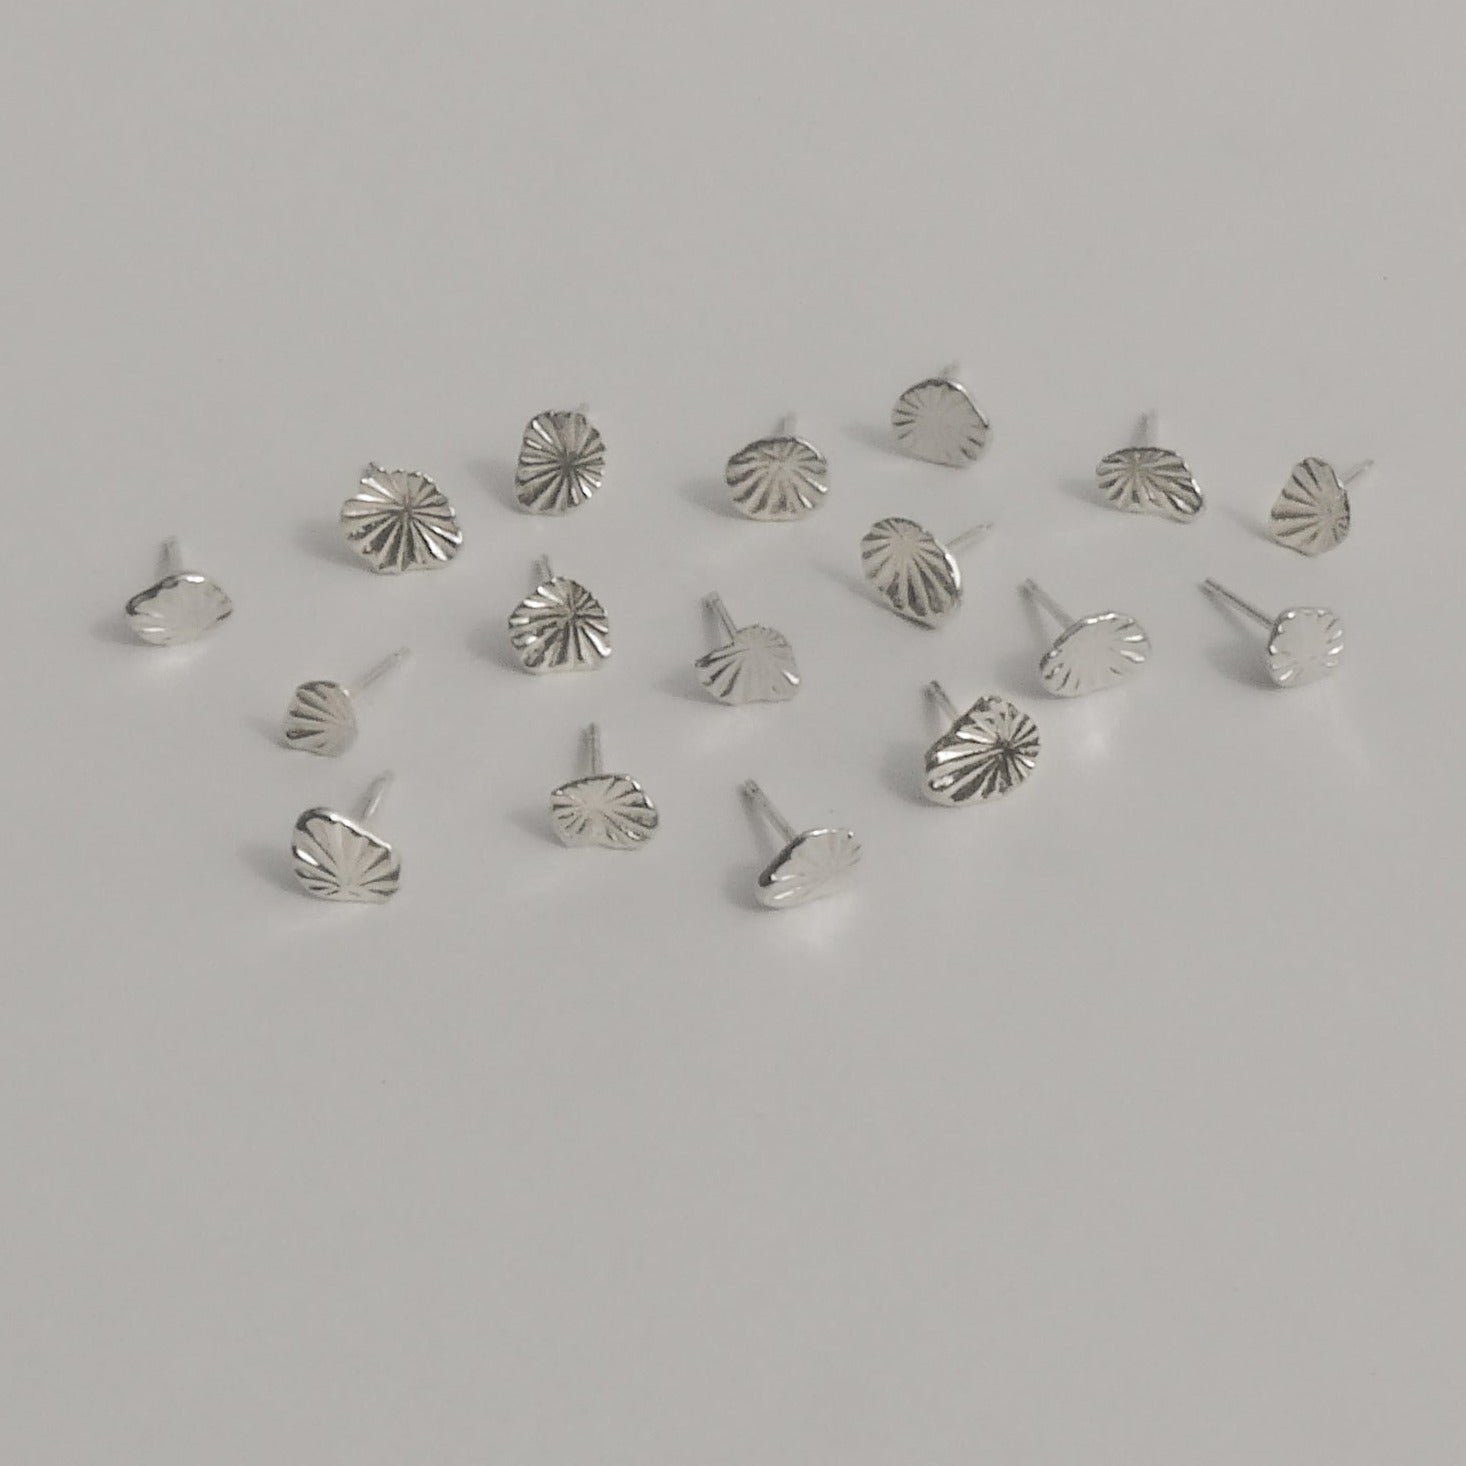 Made Line Jewelry, recycled sterling silver Ray Stud Earrings on white background